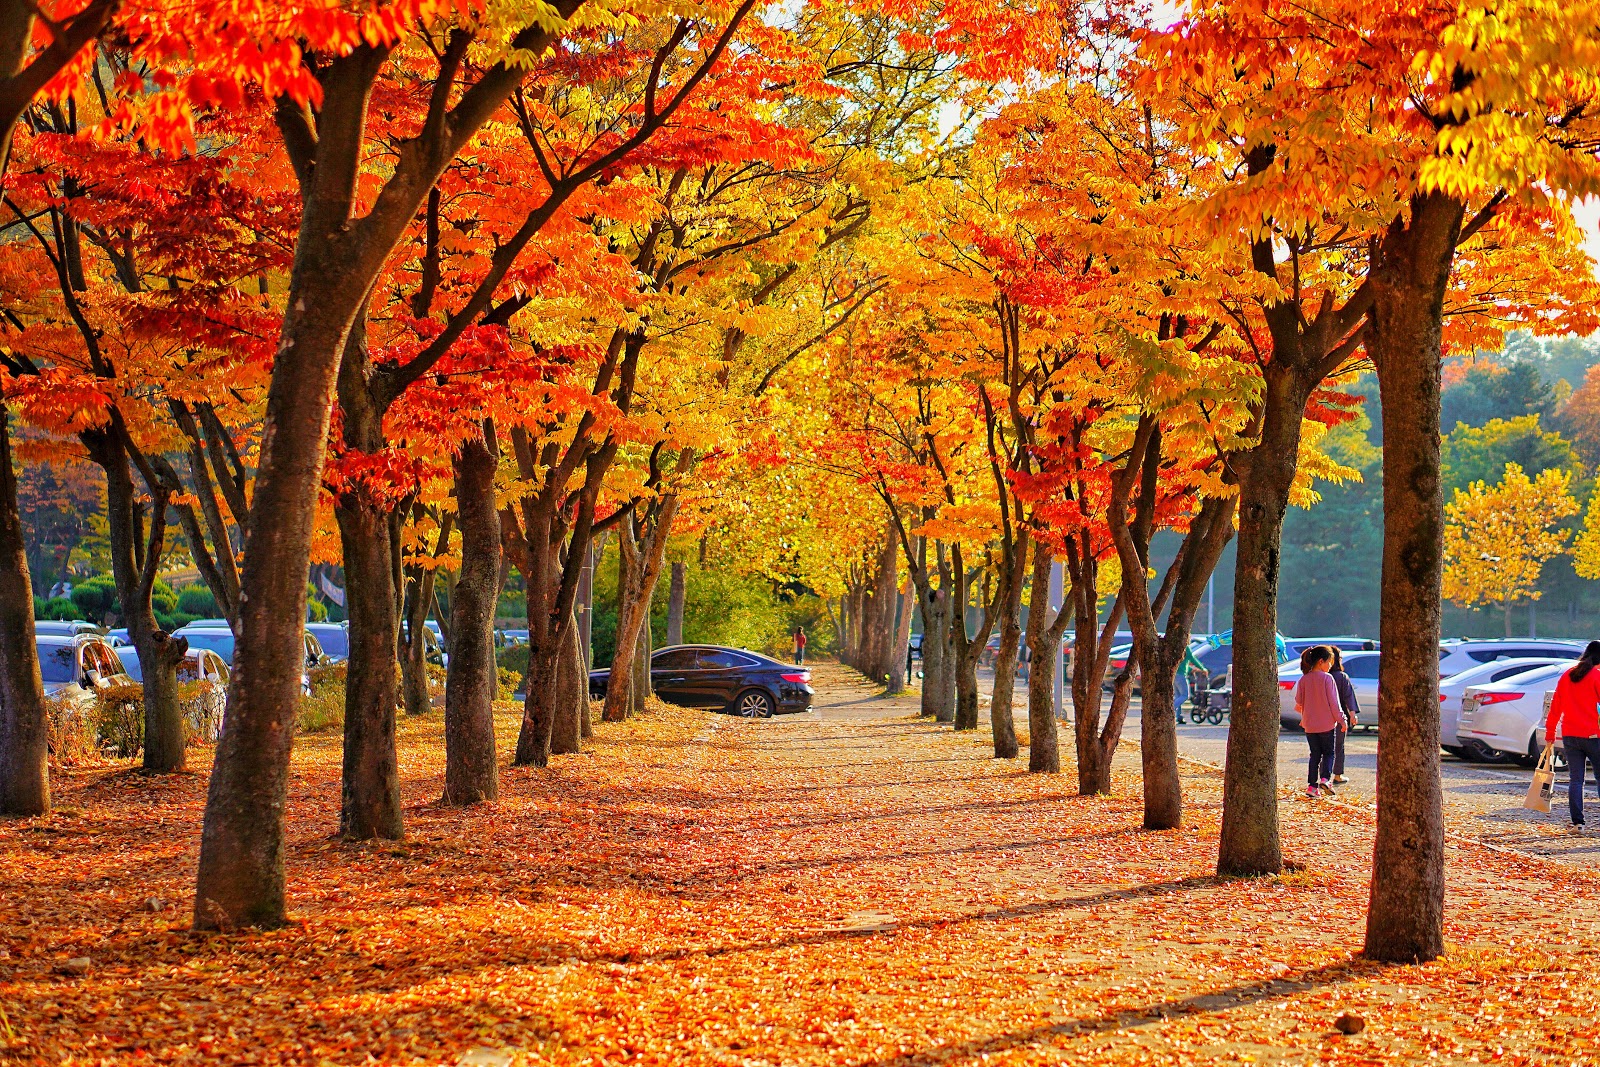 Must Visit Place to Enjoy Autumn in South Korea (Part I)